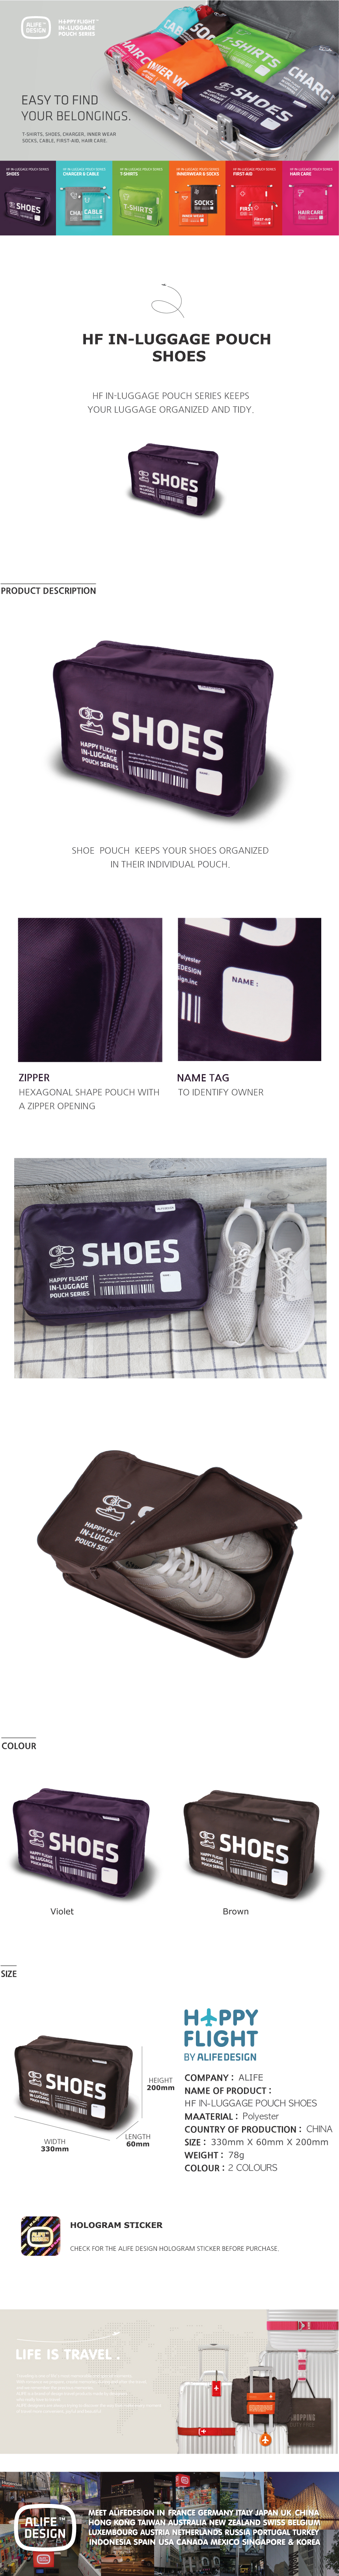 HF-INLUGGAGE-POUCH-SHOES